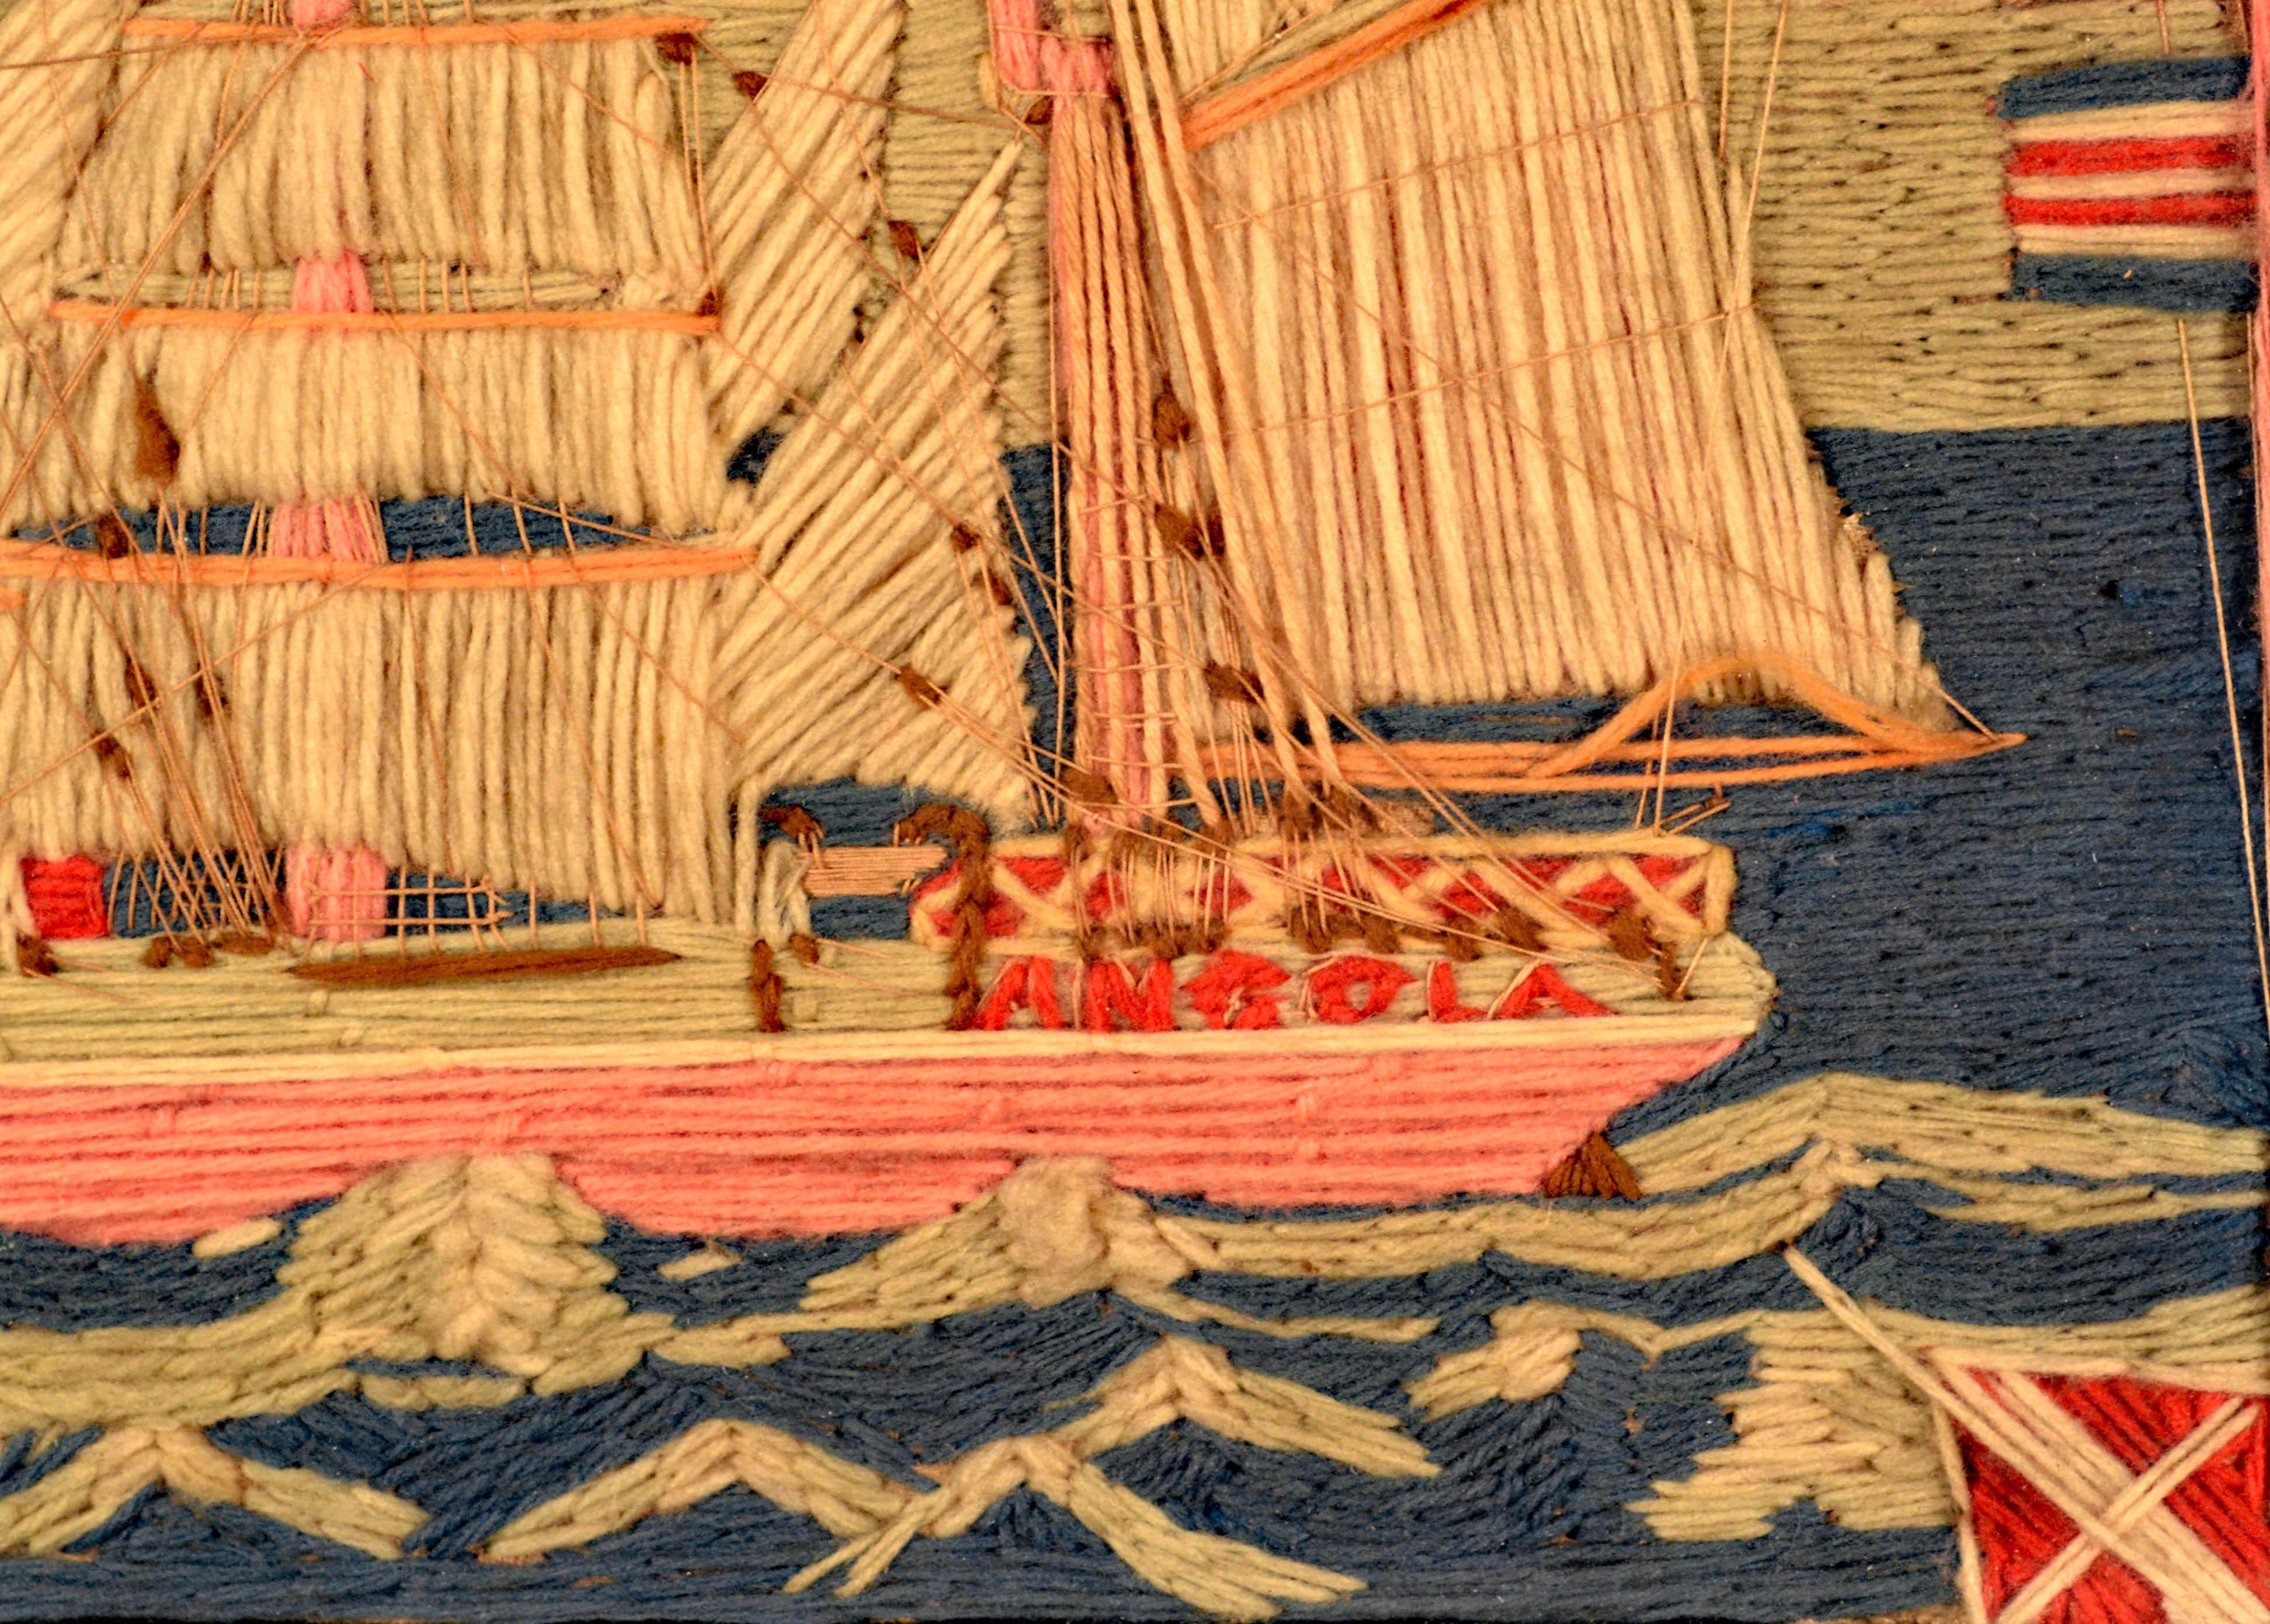 British sailor's Woolwork (woolie) of the Angola,
circa 1875-1885.

The colorful sailor's woolwork known as a woolie depicts a portside view of a fully-rigged three-masted underway on a rough sea. The wool is beautifully rendered in a Folk Art